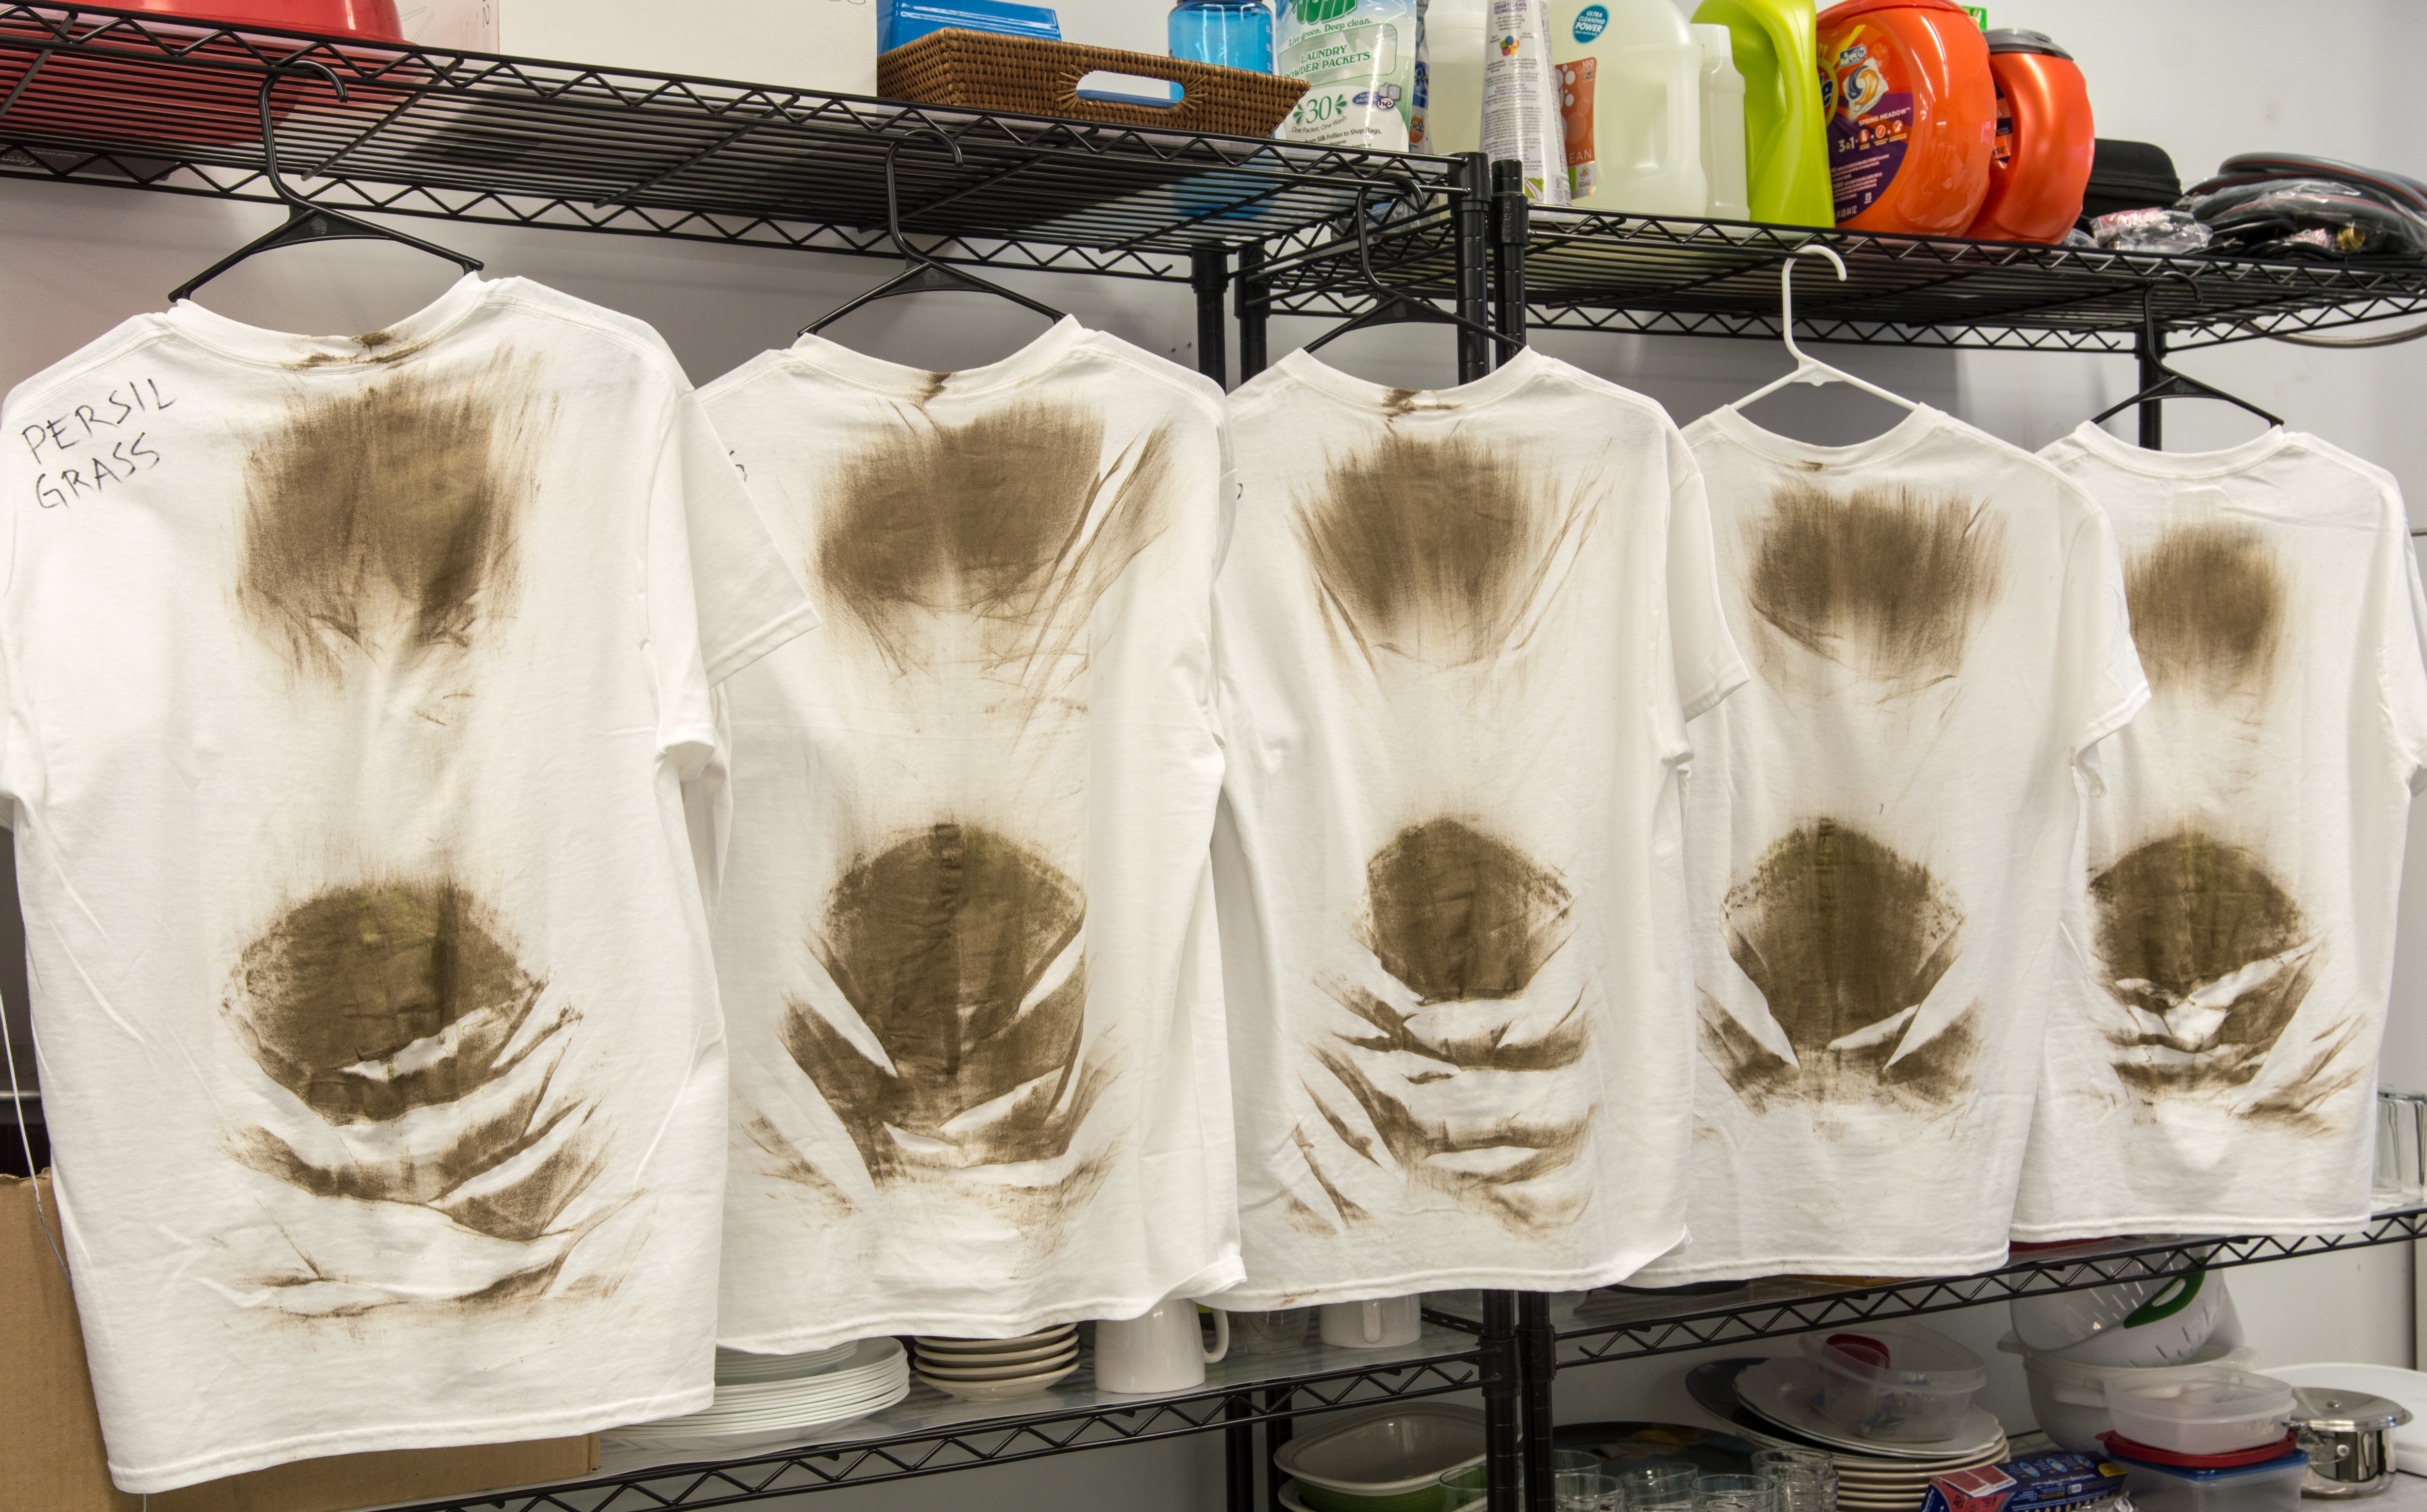 Grass- and dirt-stained T-shirts